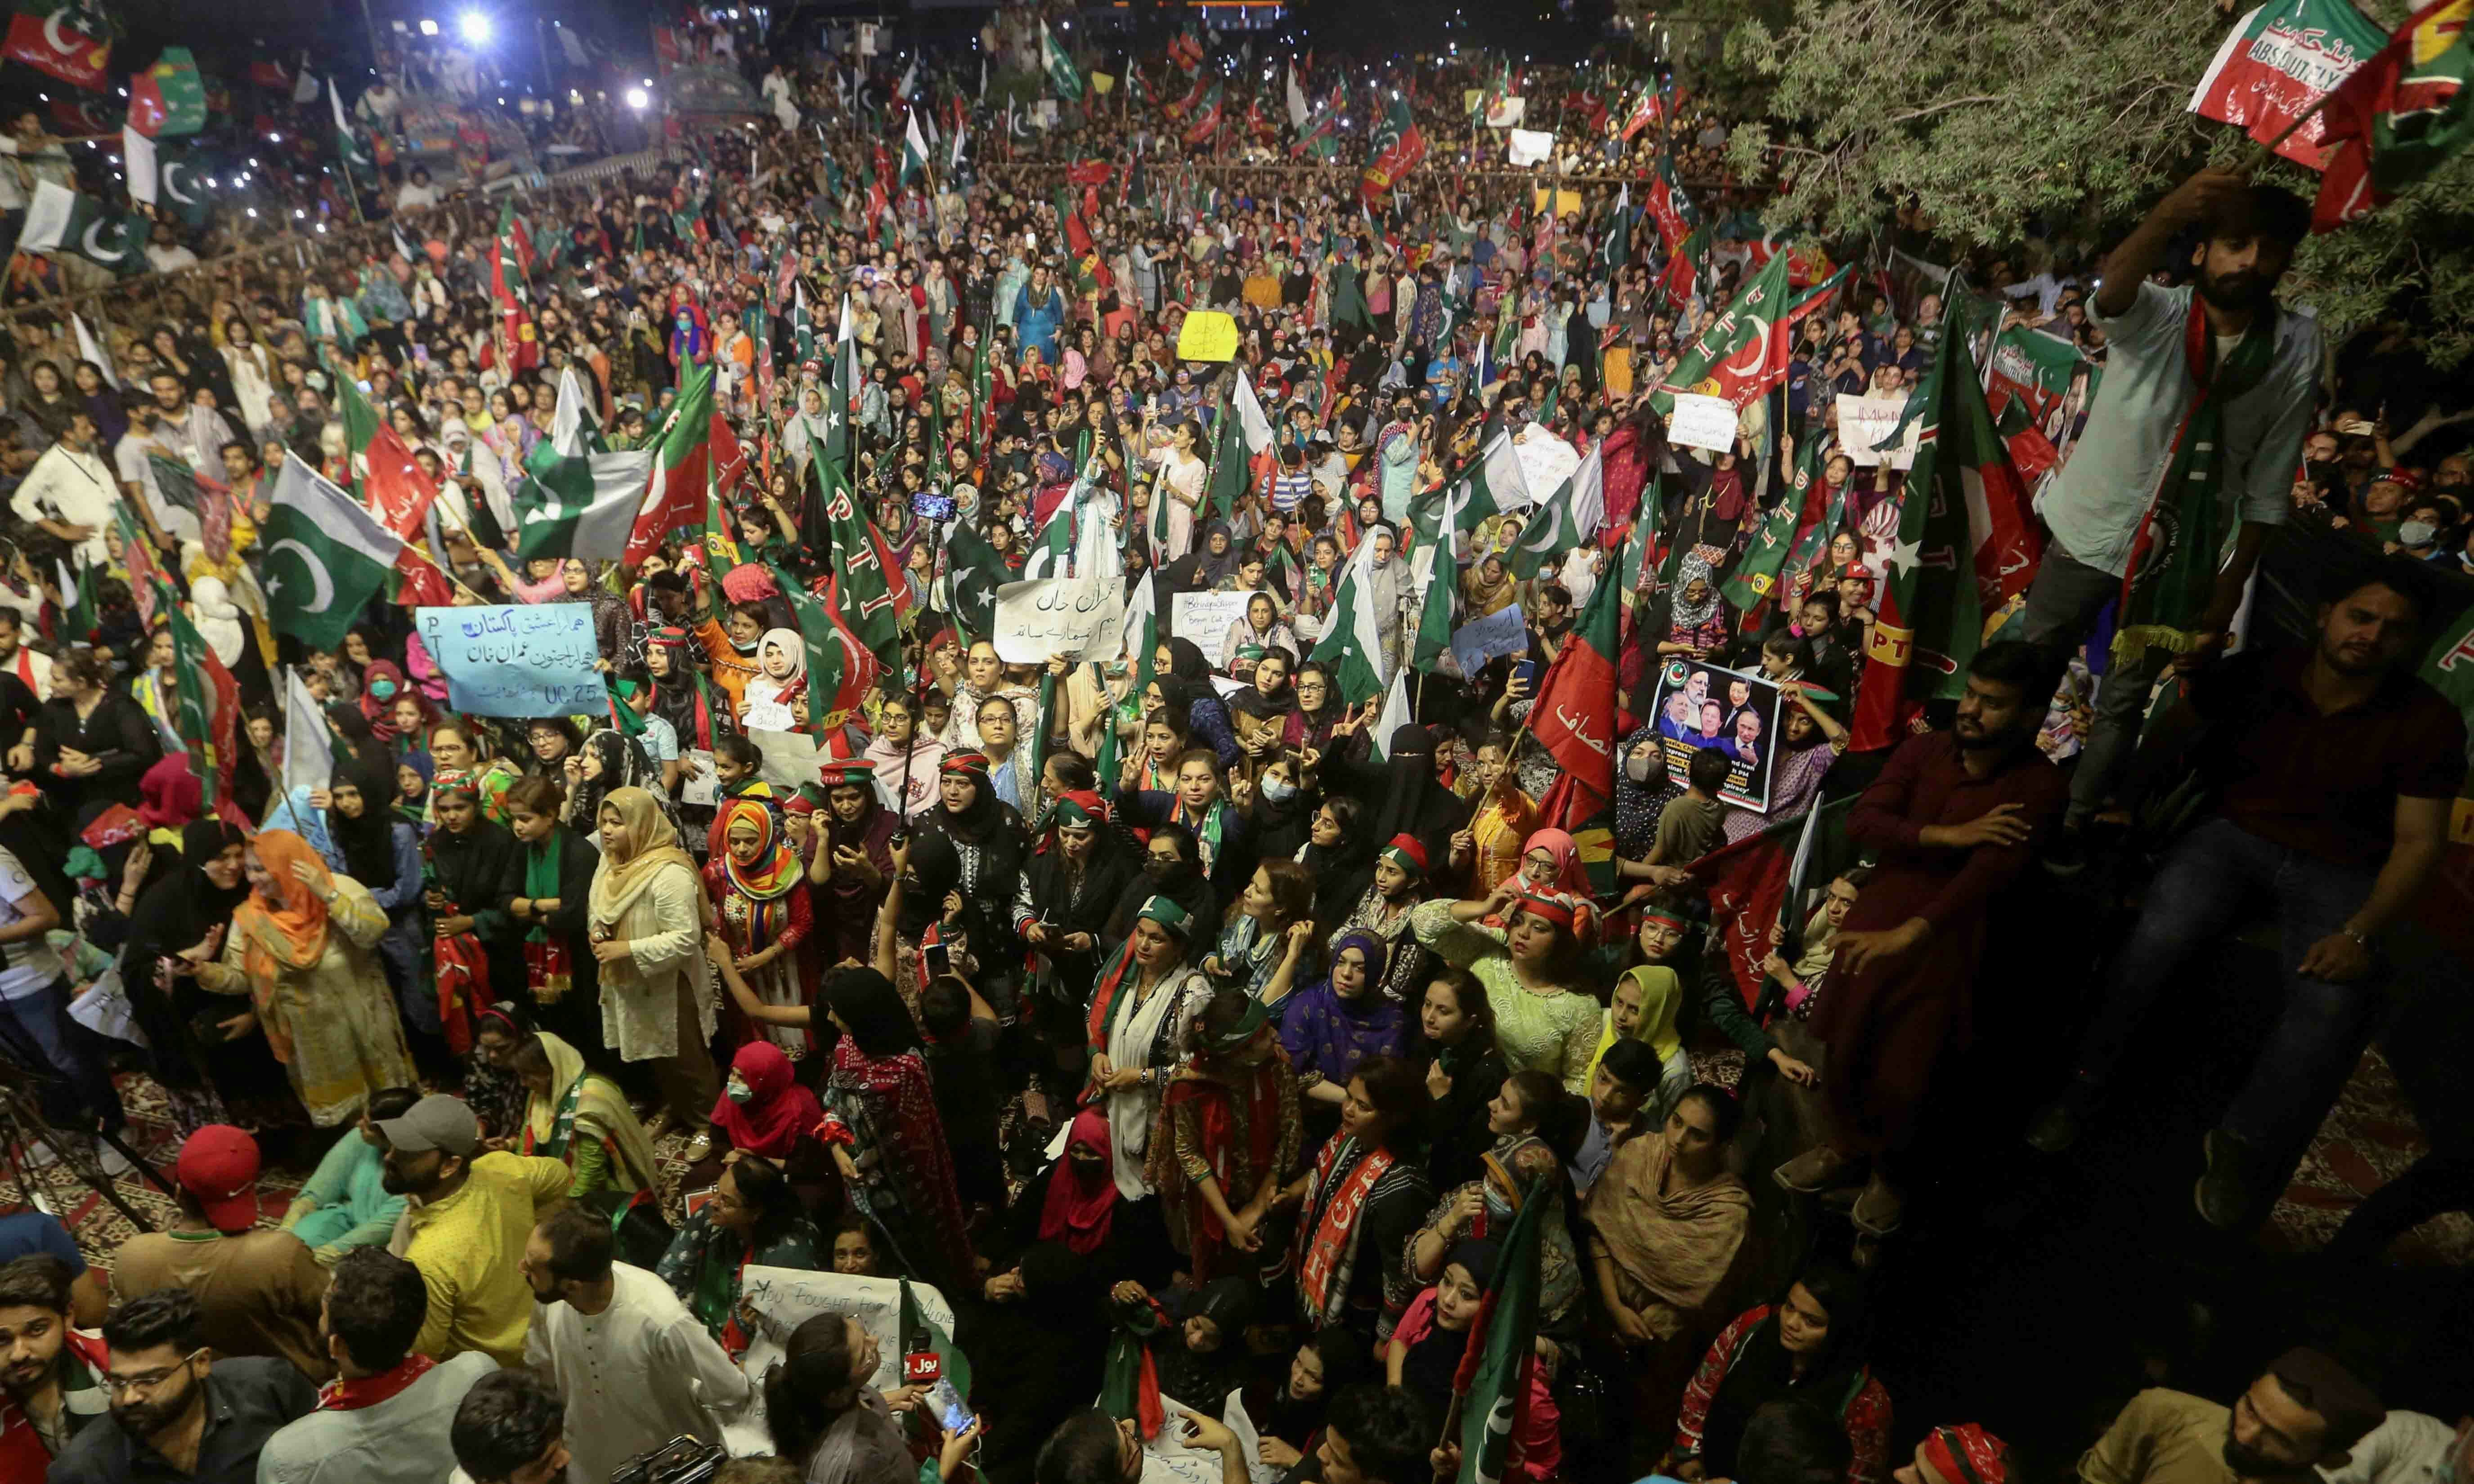 PTI supporters rally in support of former prime minister Imran Khan in Karachi on April 10. REUTERS